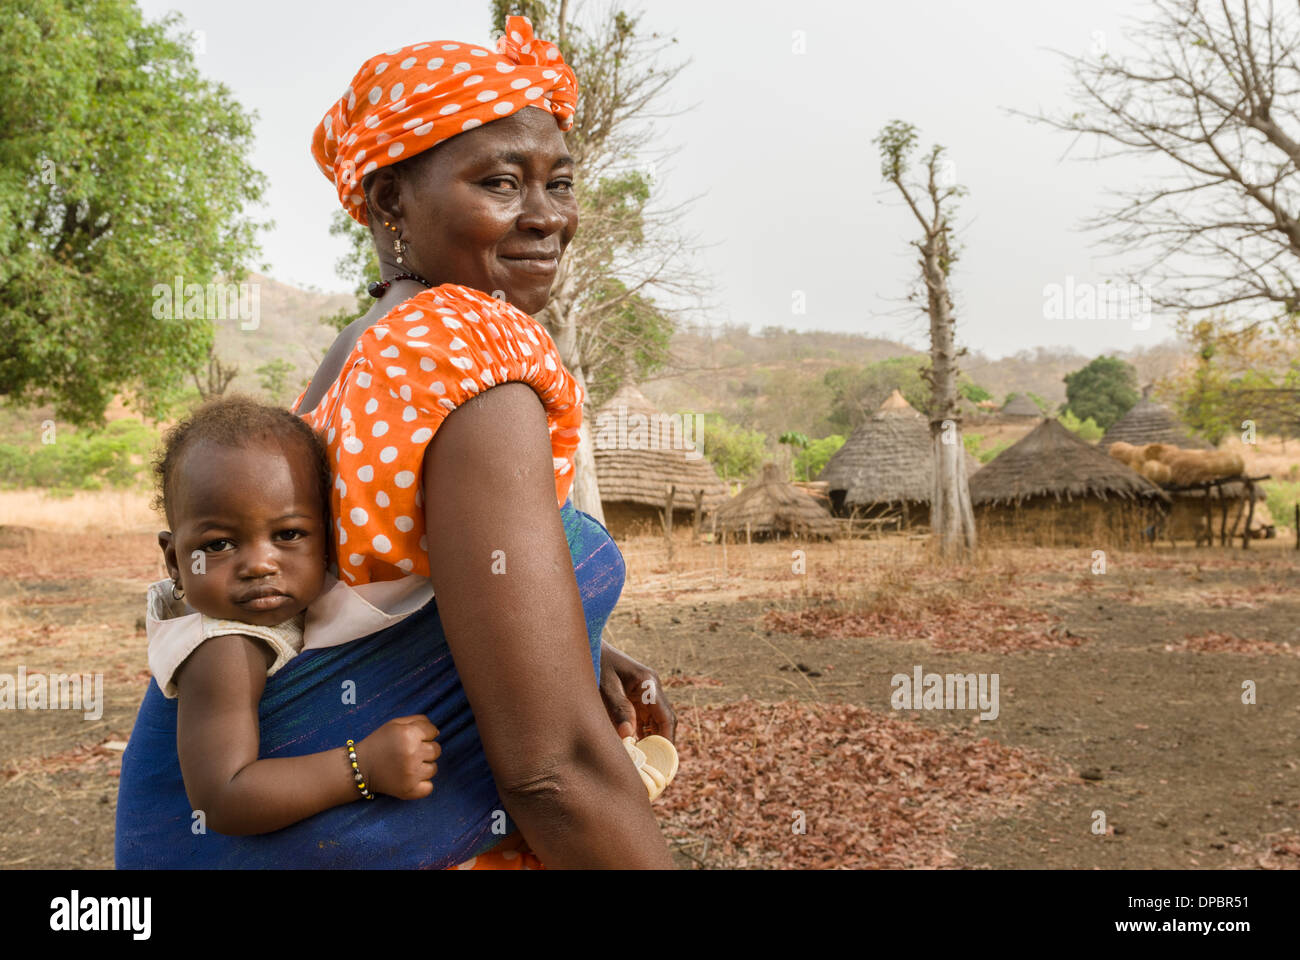 Woman and child, Ethiolo village, Bassari country, Senegal, Africa. Stock Photo